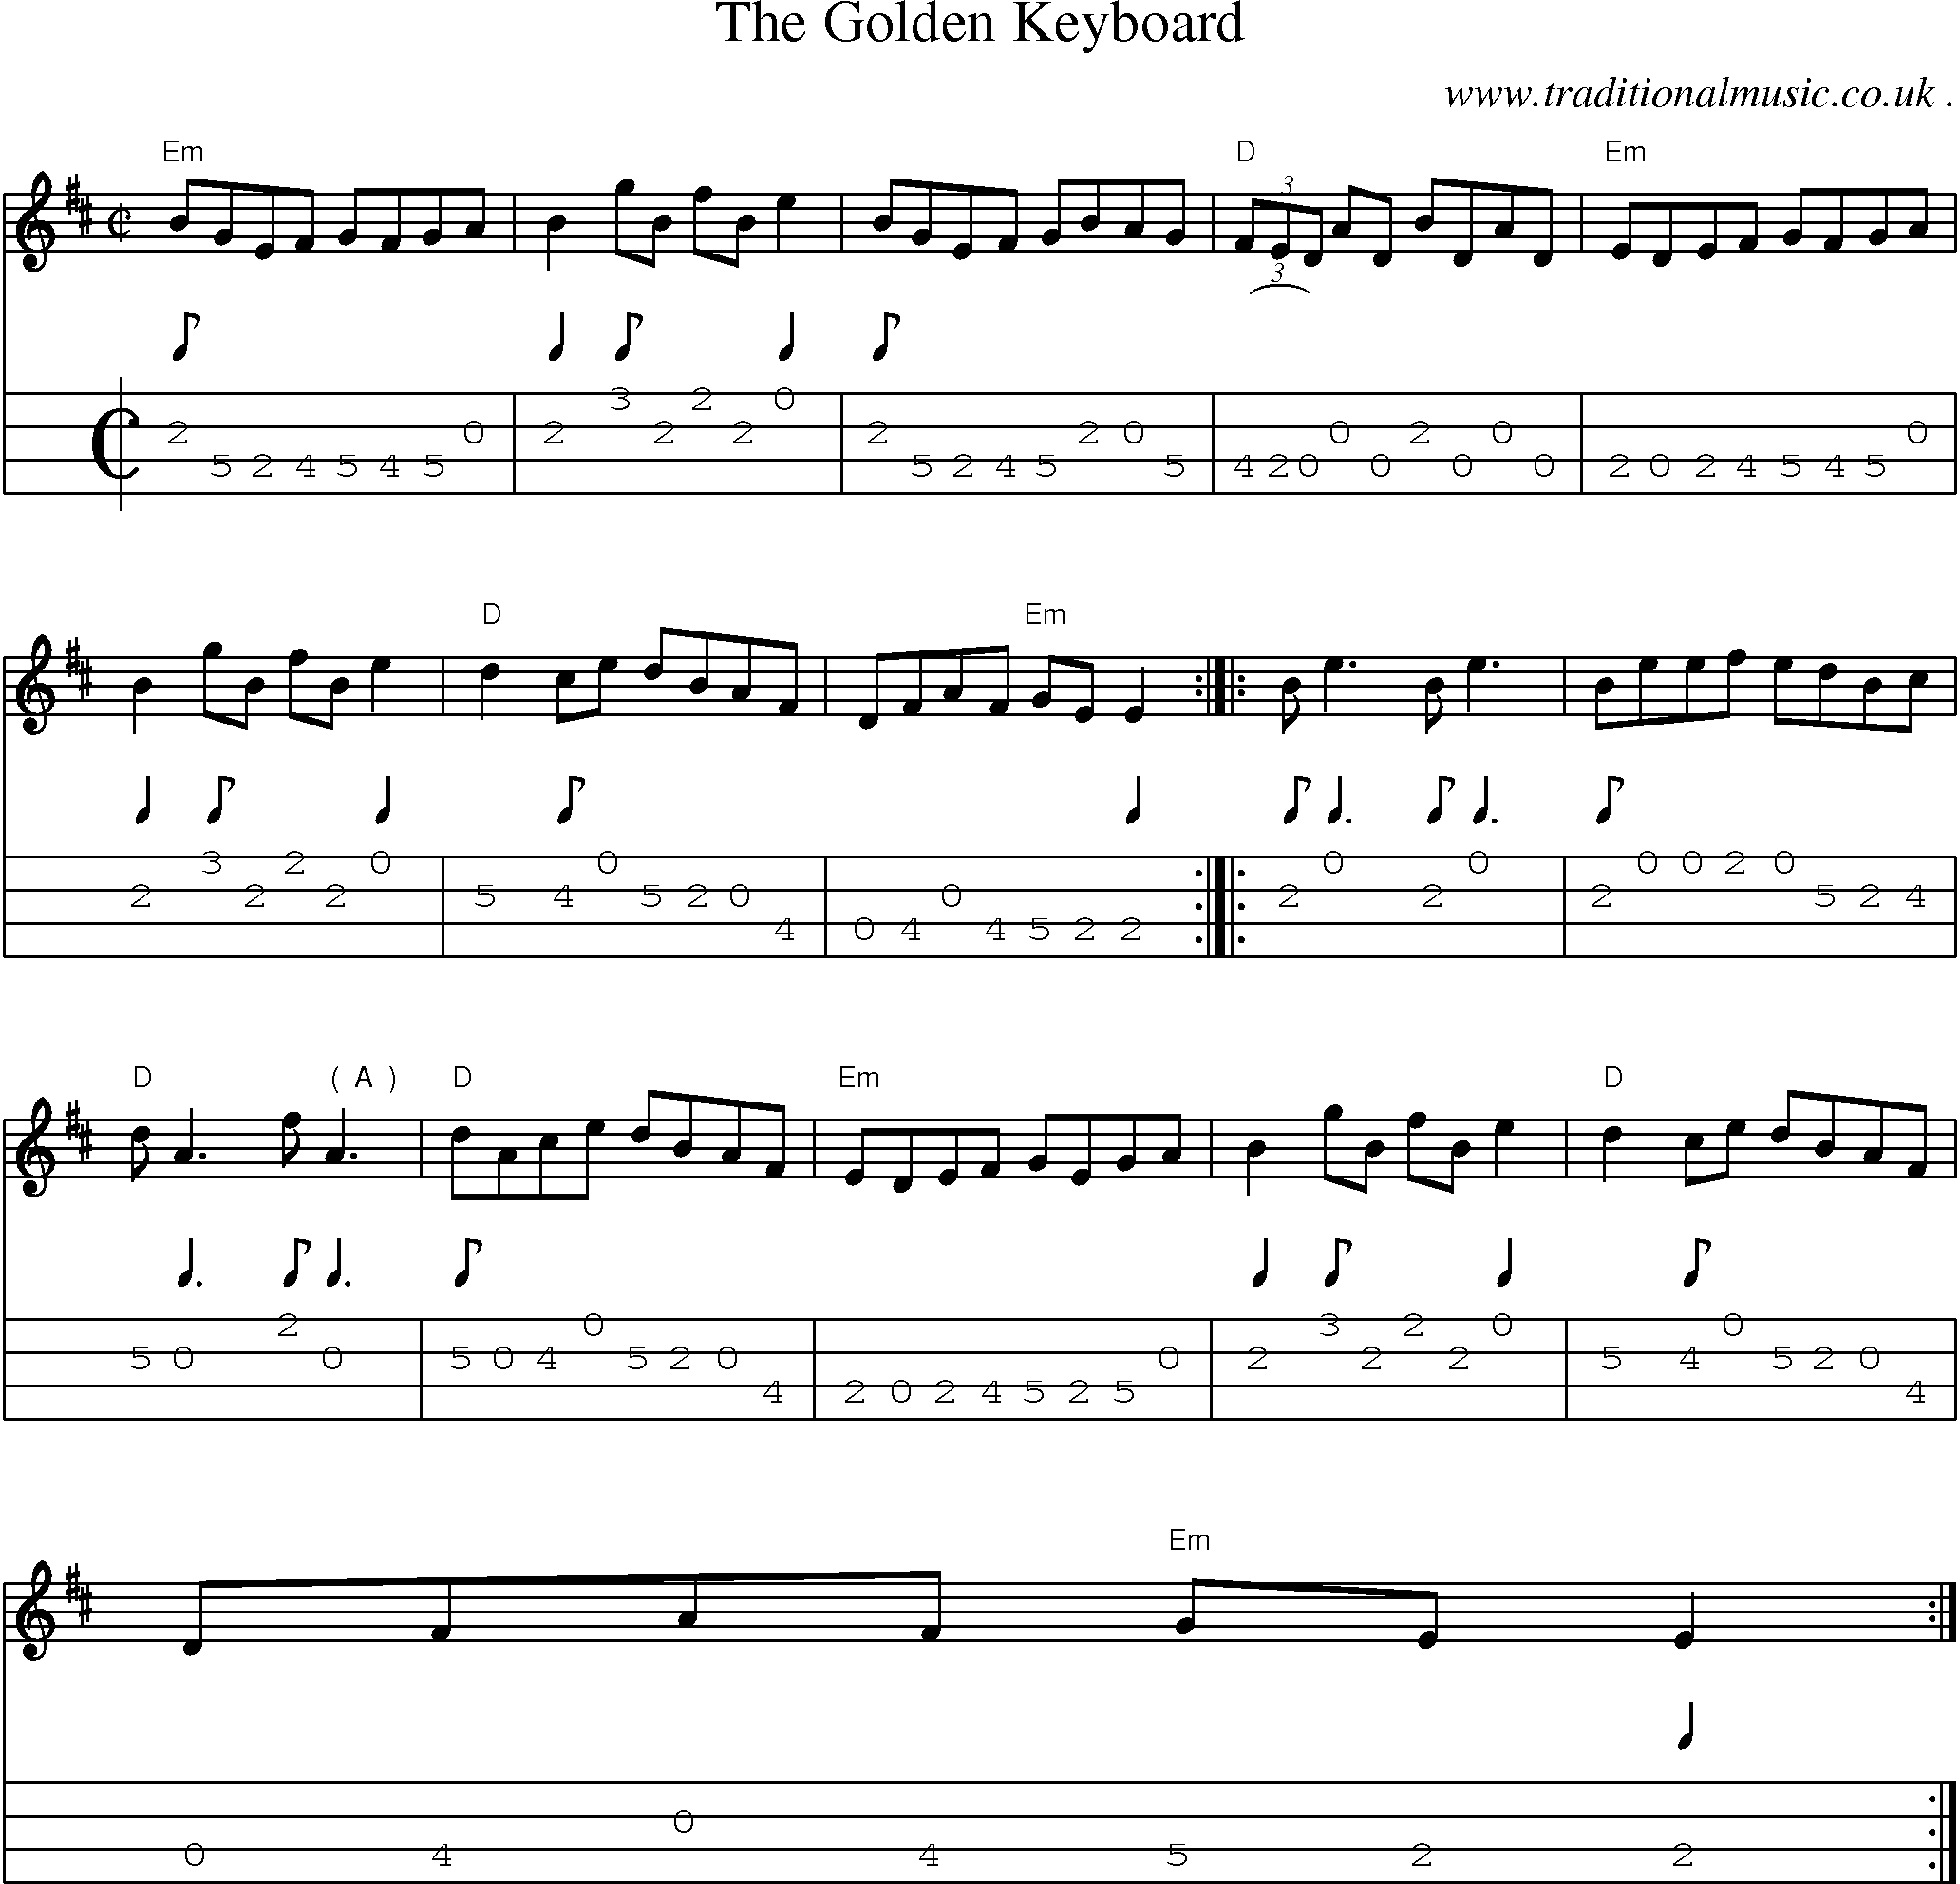 Music Score and Guitar Tabs for The Golden Keyboard